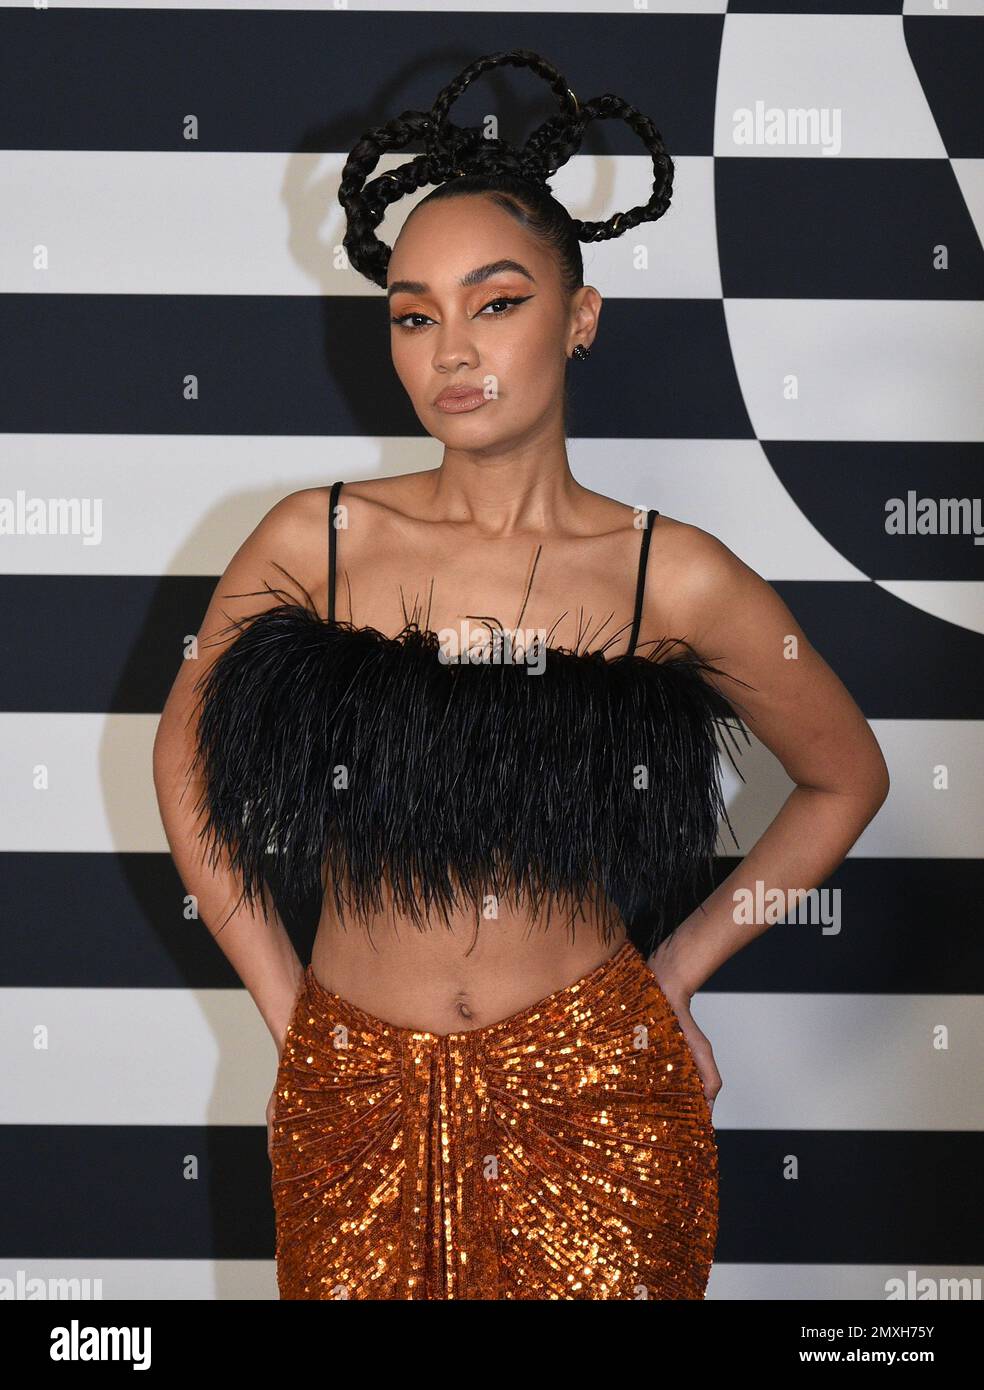 Hollywood, USA. 02nd Feb, 2023. Leigh-Anne Pinnock attends the Warner Music Group Pre-Grammy Party at Hollywood Athletic Club on February 02, 2023 in Hollywood, California. Photo: Annie Lesser/imageSPACE Credit: Imagespace/Alamy Live News Stock Photo